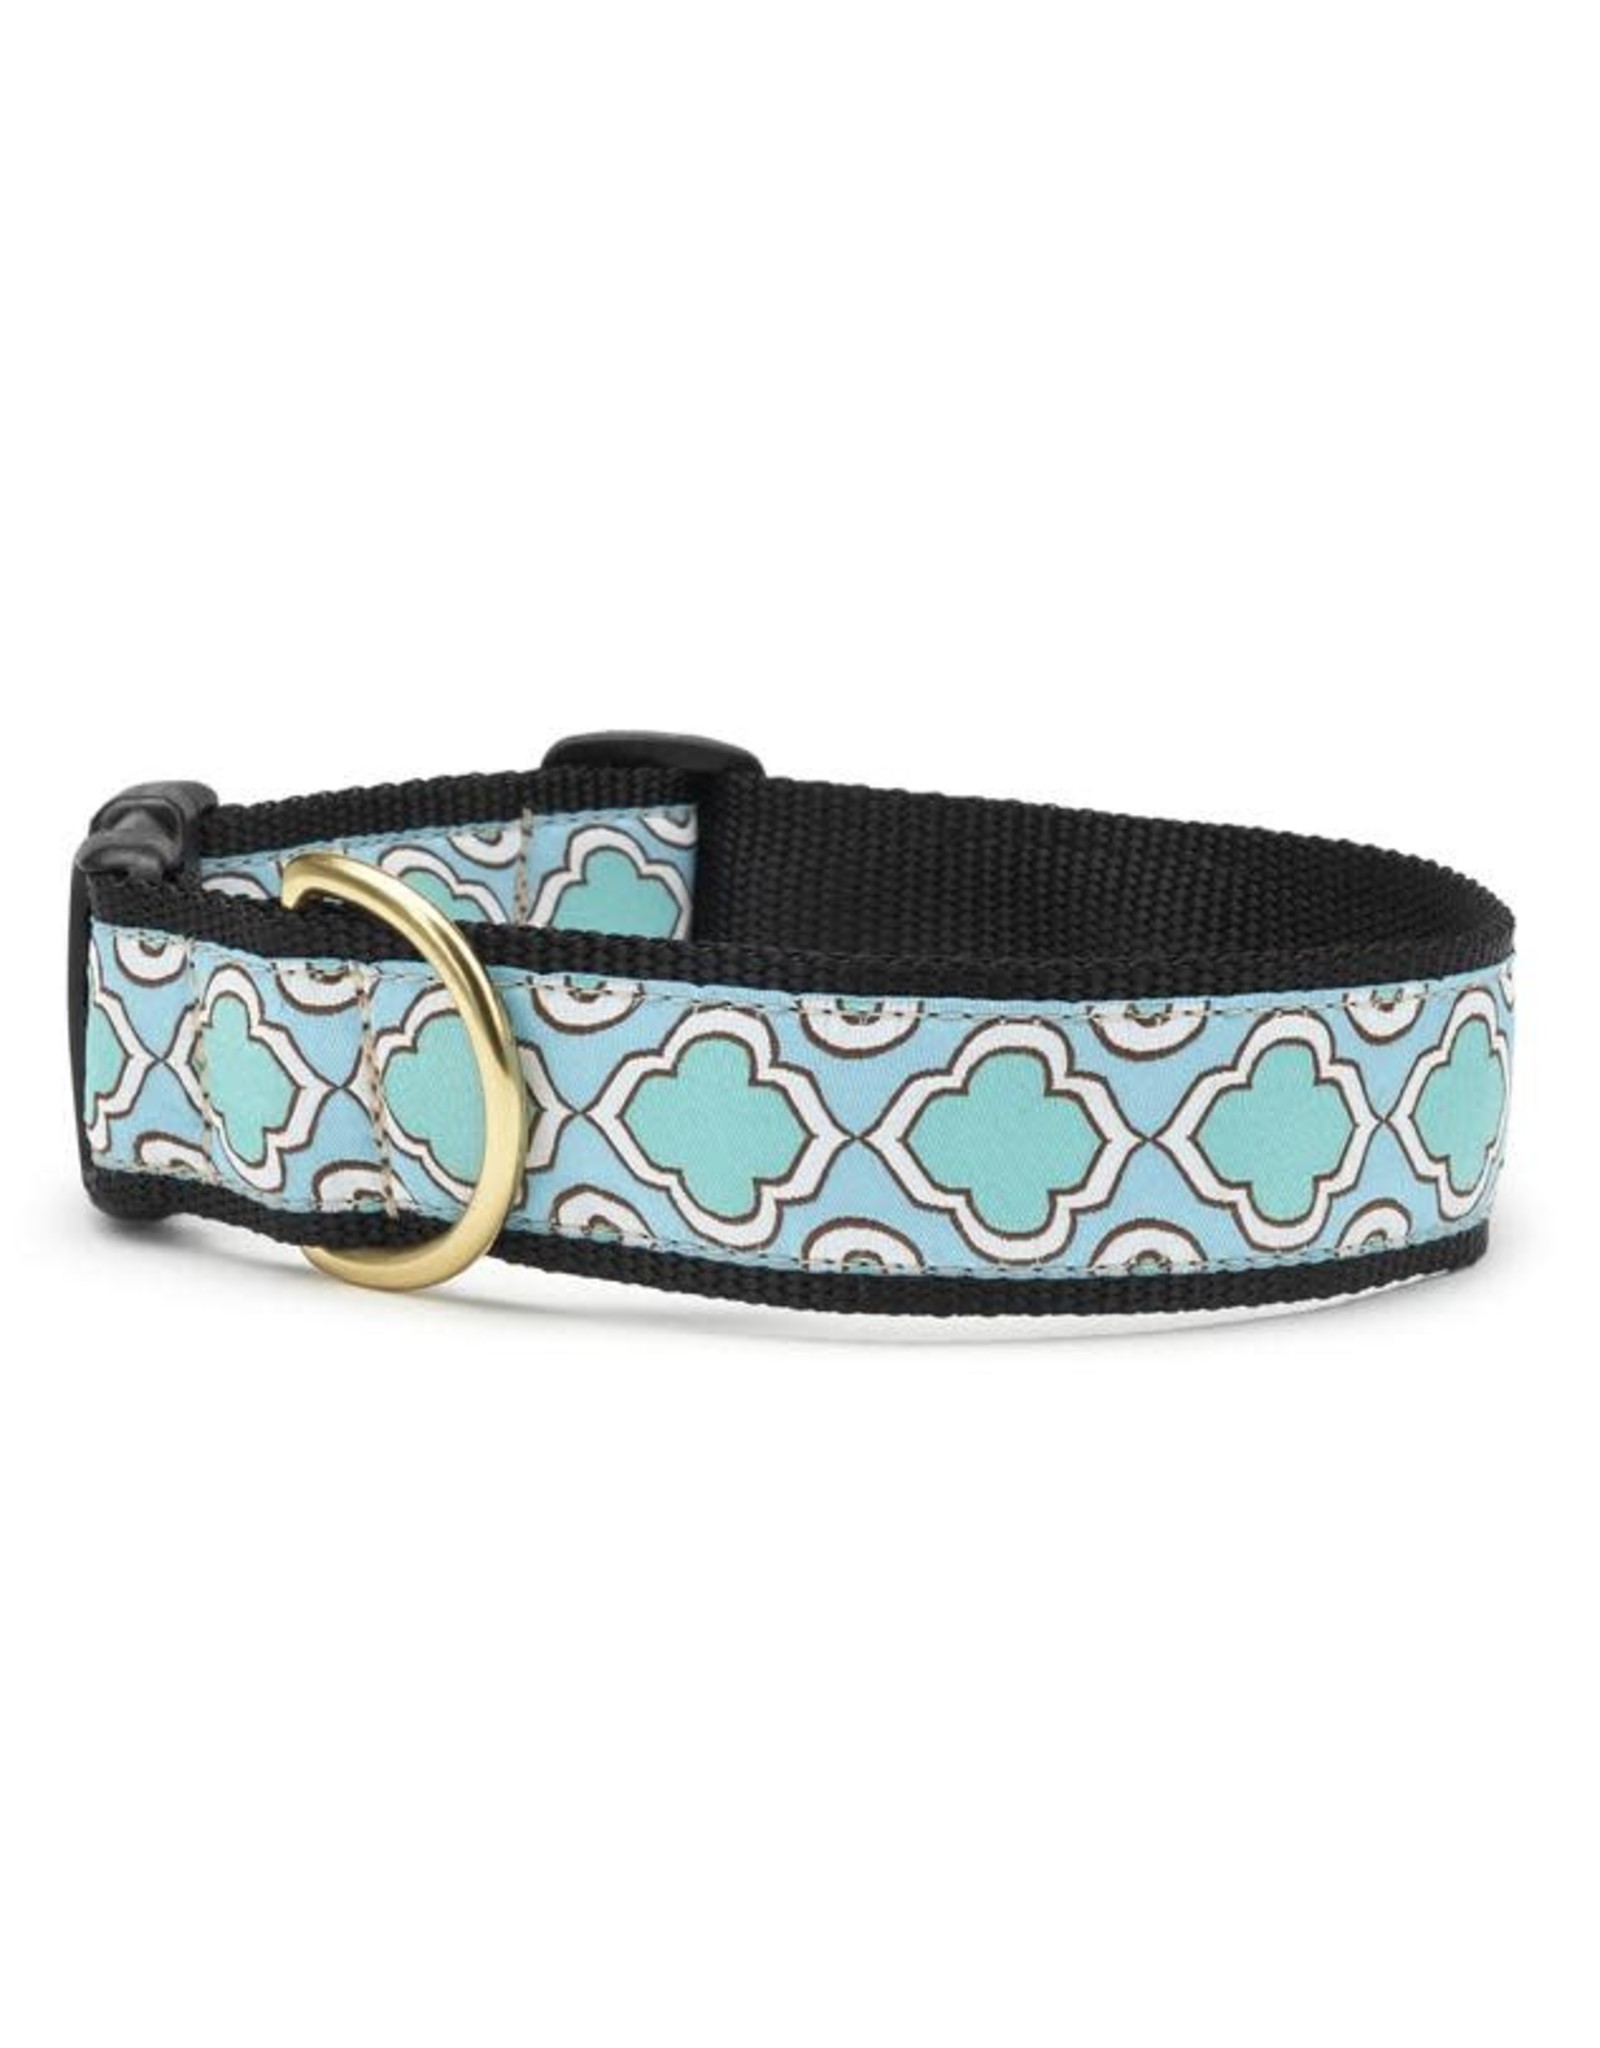 Up Country Seaglass Collar: Extra Wide, L